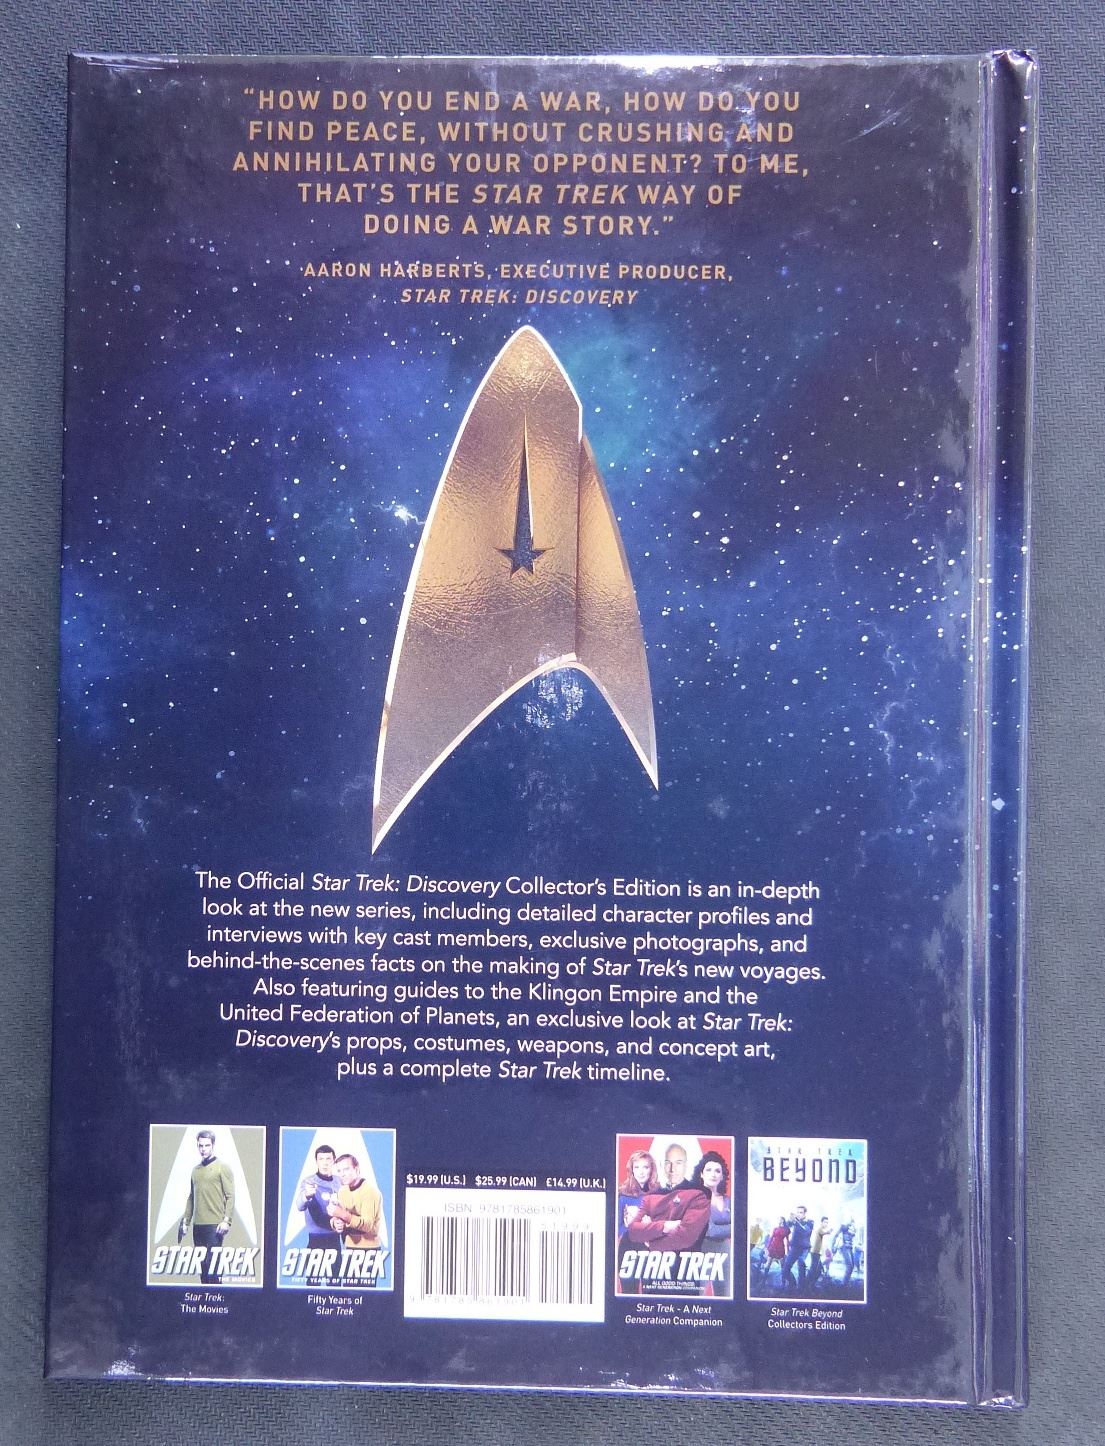 Star Trek Discovery - The Official Collectors Edition - Art Book Hardback #1BM